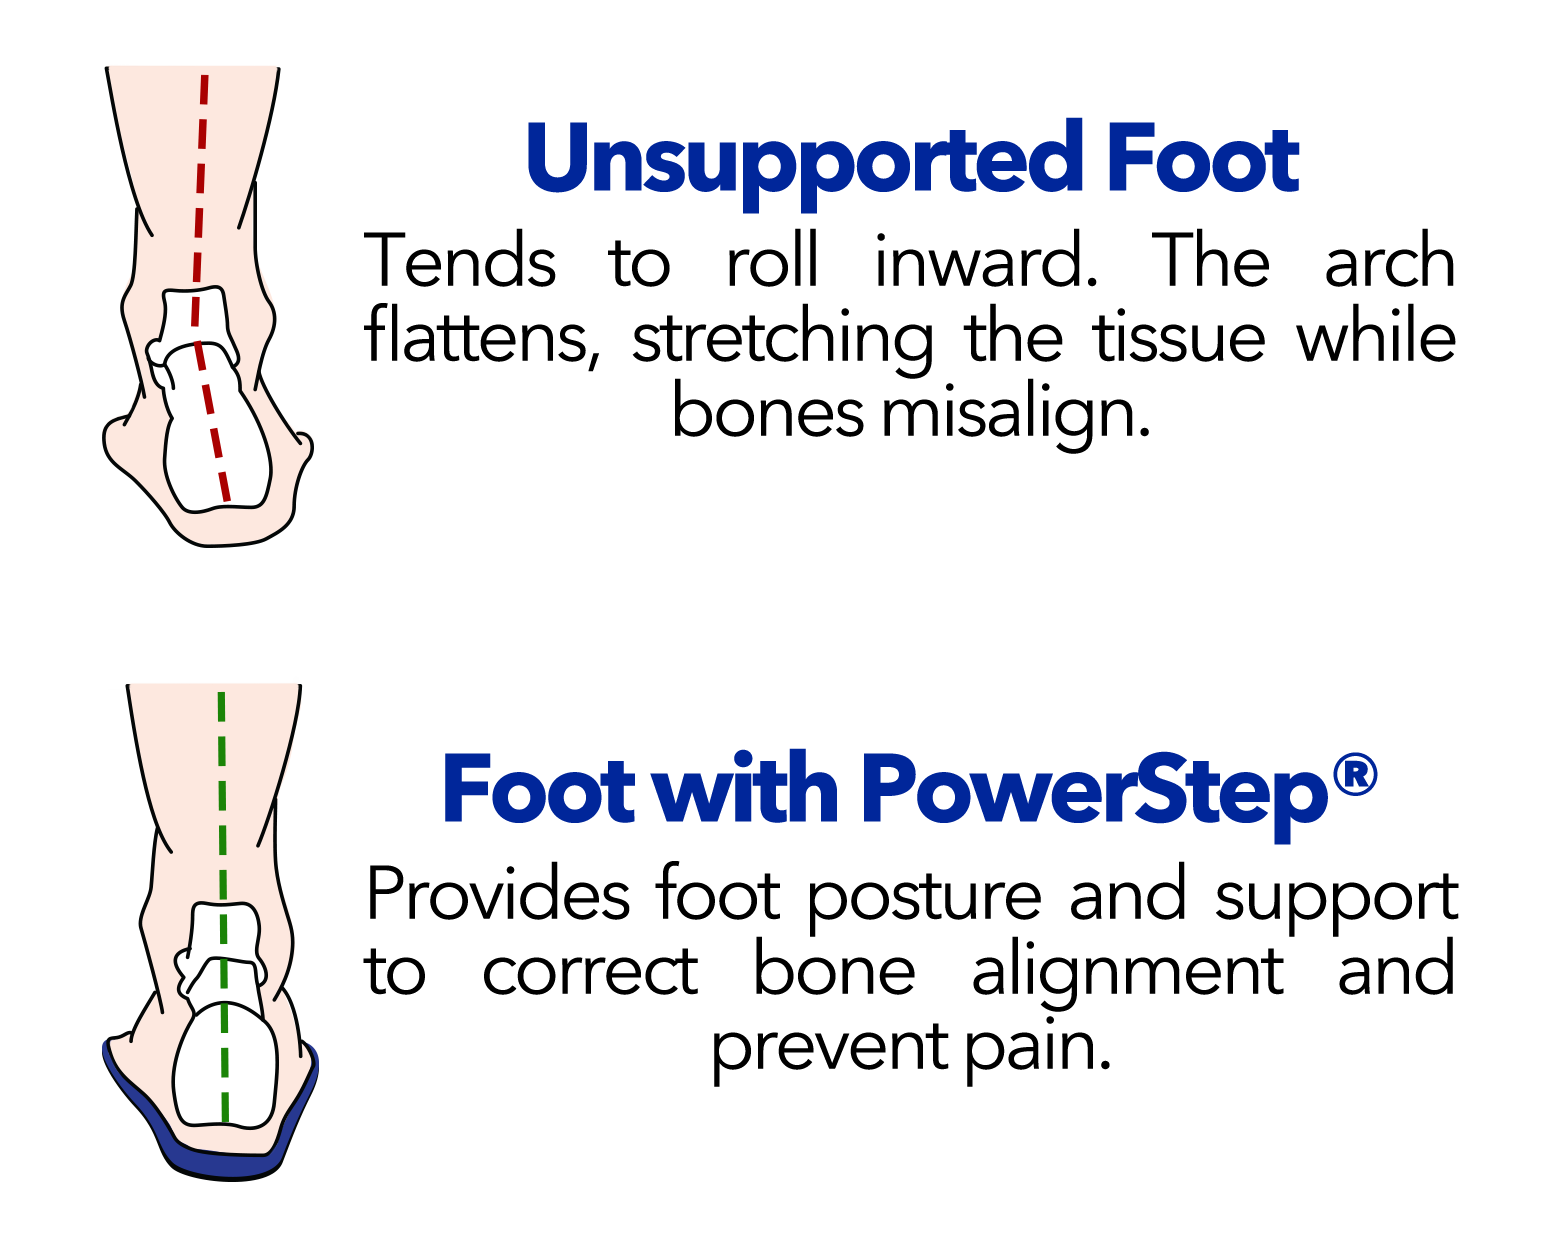 unsupported foot without powerstep and supported foot with powerstep orthotics